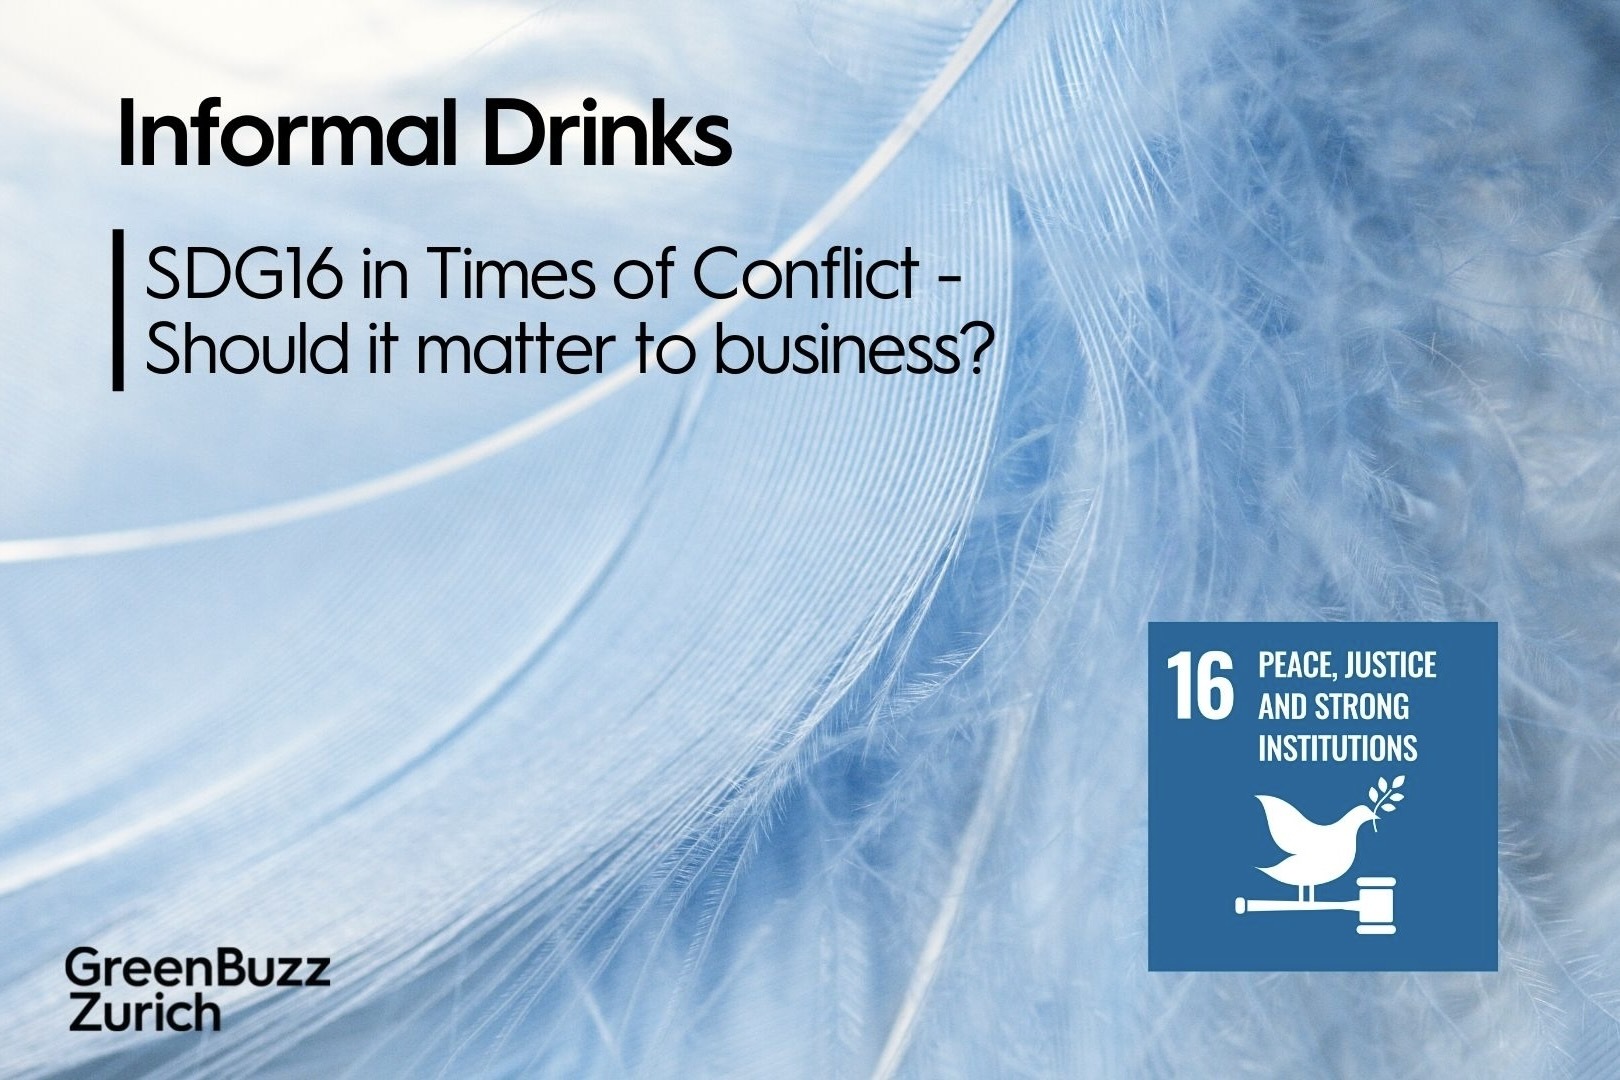 SDG16 in Times of Conflict